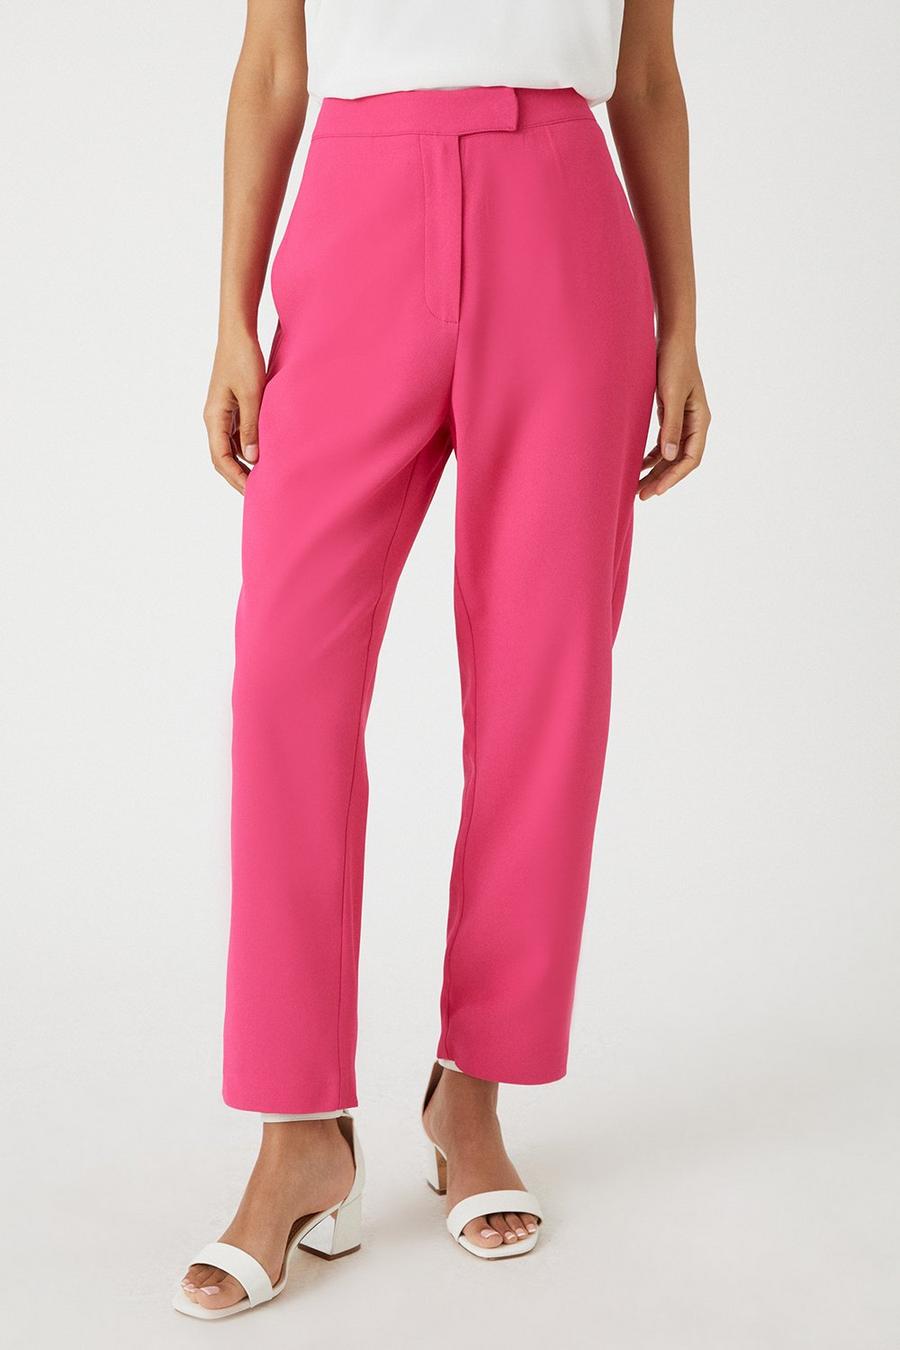 Petite Pink Tapered Trousers